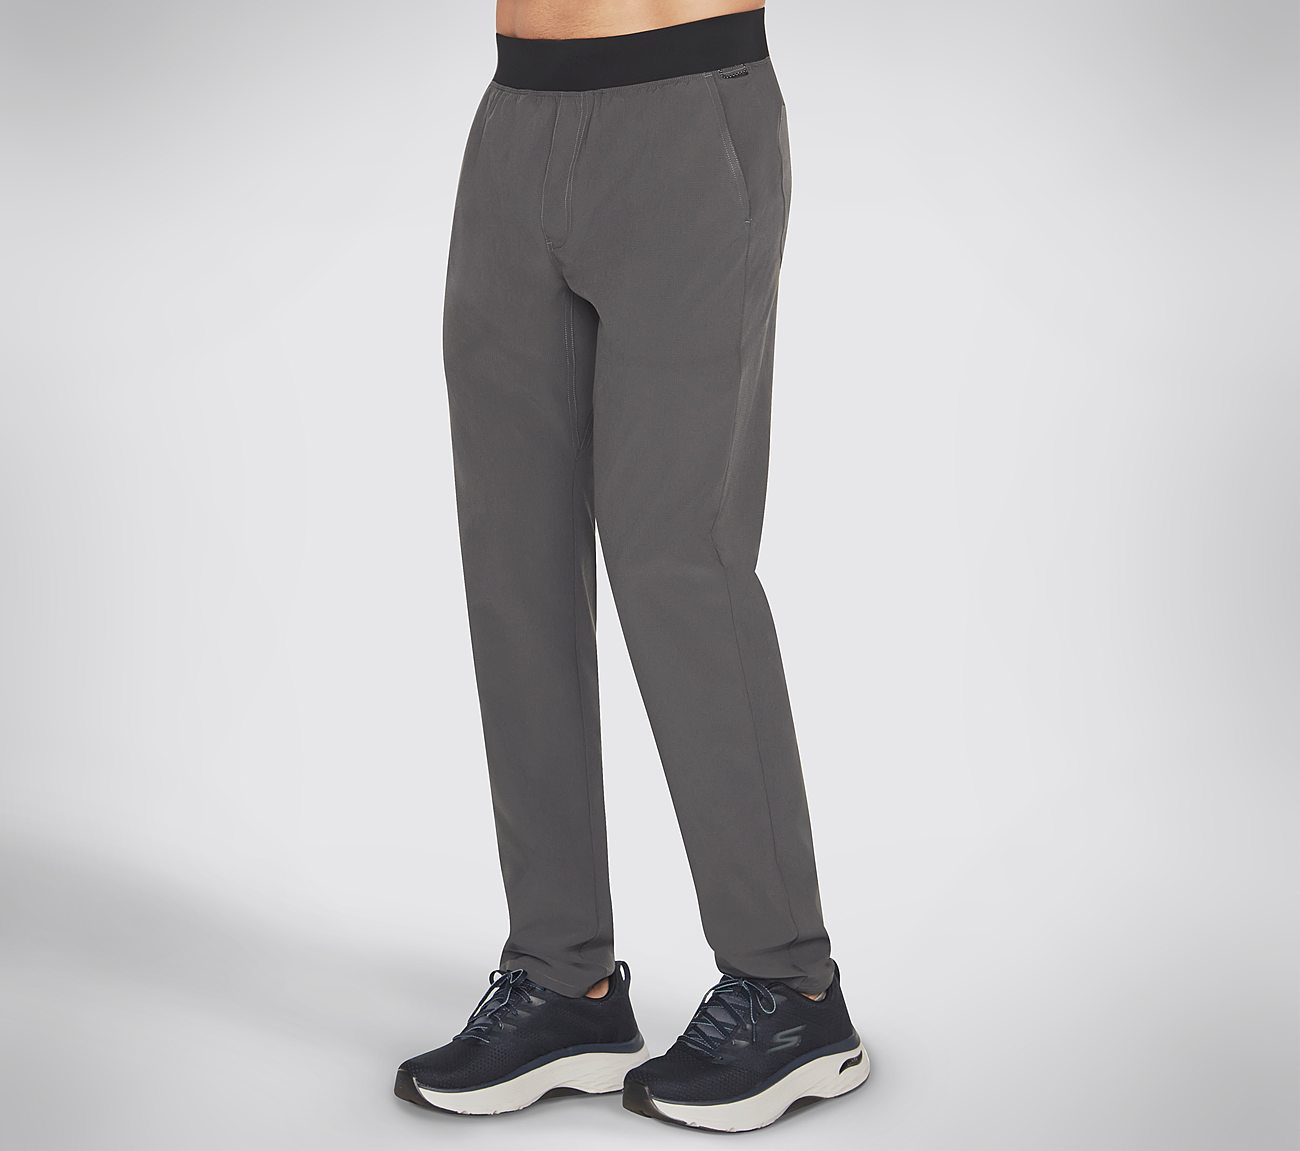 THE GOWALK PANT TEARSTOP, BLACK/CHARCOAL Apparels Lateral View